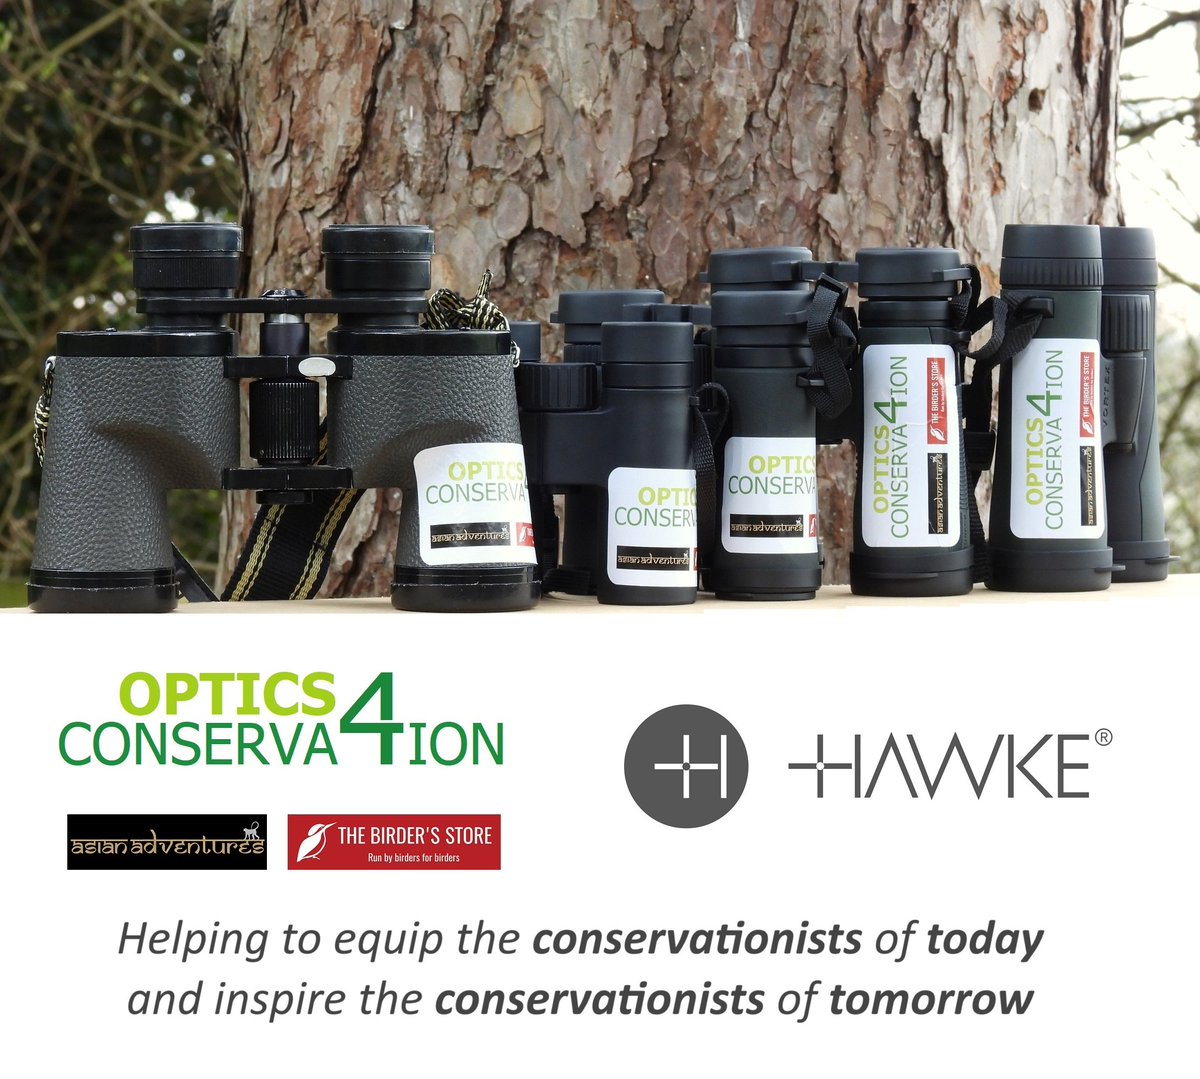 We're extremely grateful to our customers and Hawke Optics for supporting our #Optics4Conservation scheme in conjunction with @AsianWildlife. Their generous donations will be put to good use to aid #wildlife #conservation and #education in India 🇮🇳 #IndiAves #NatureConservation